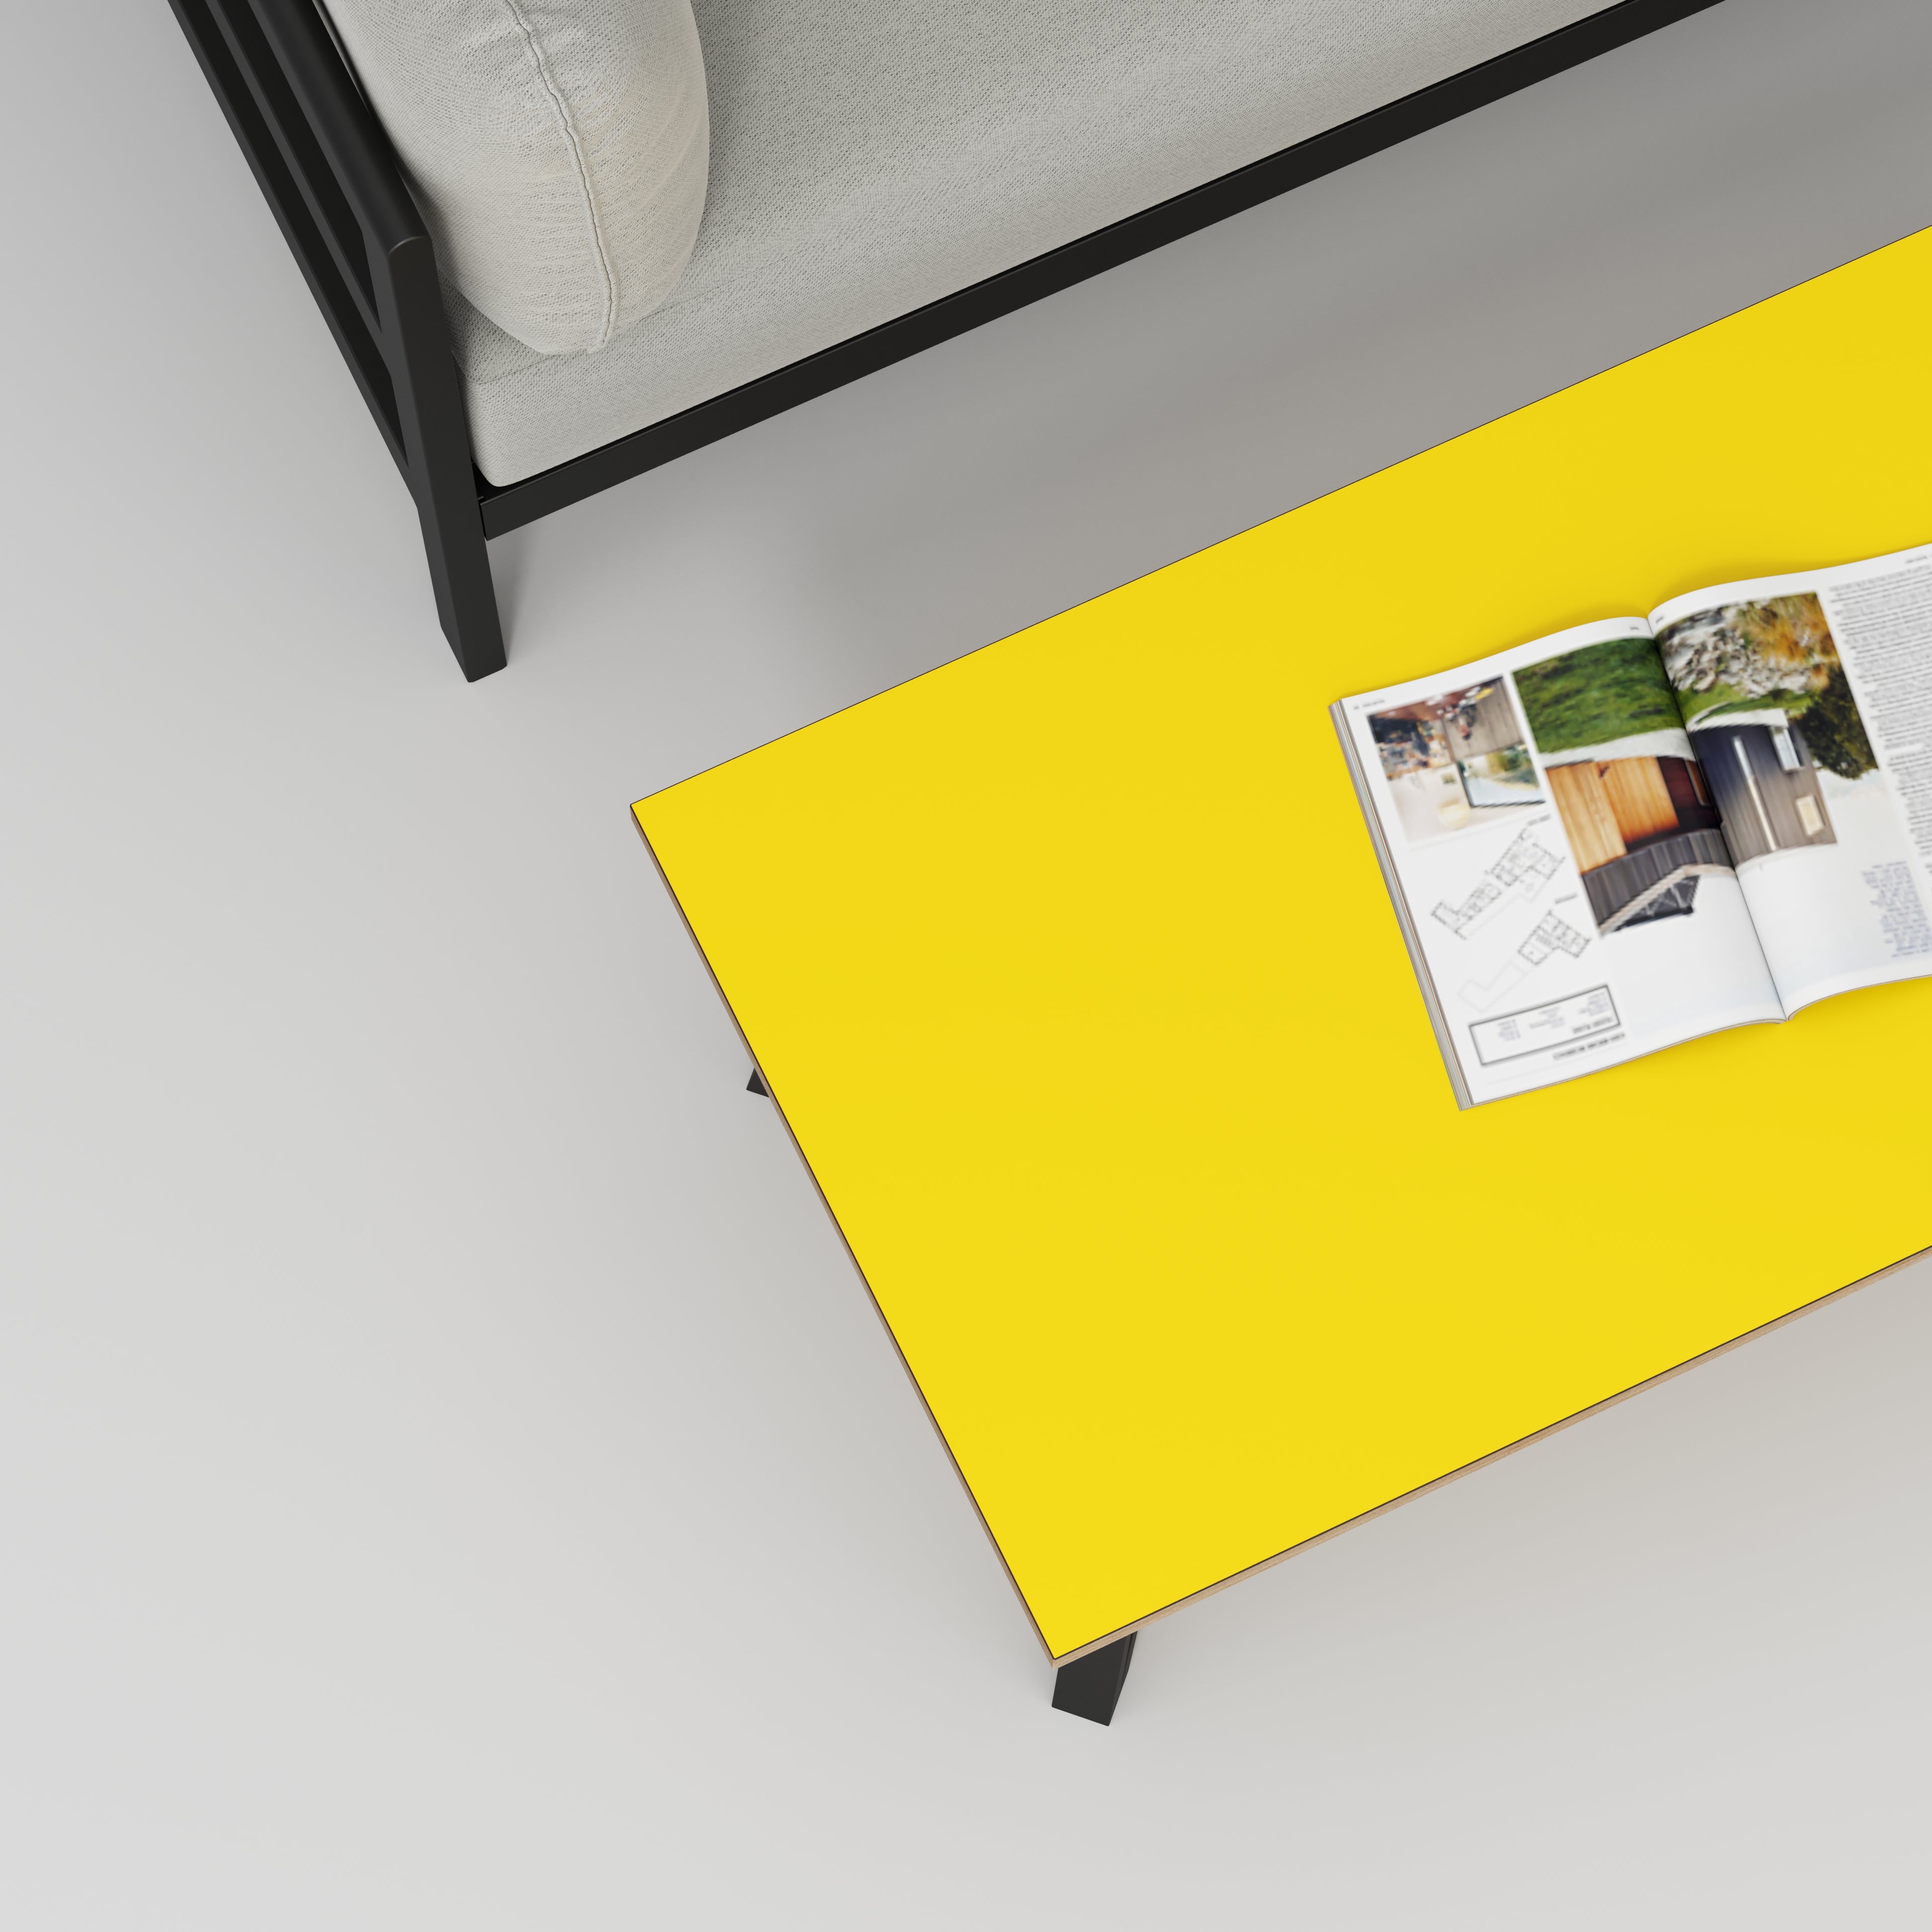 Coffee Table with Black Box Hairpin Legs - Formica Chrome Yellow - 1200(w) x 600(d) x 425(h)